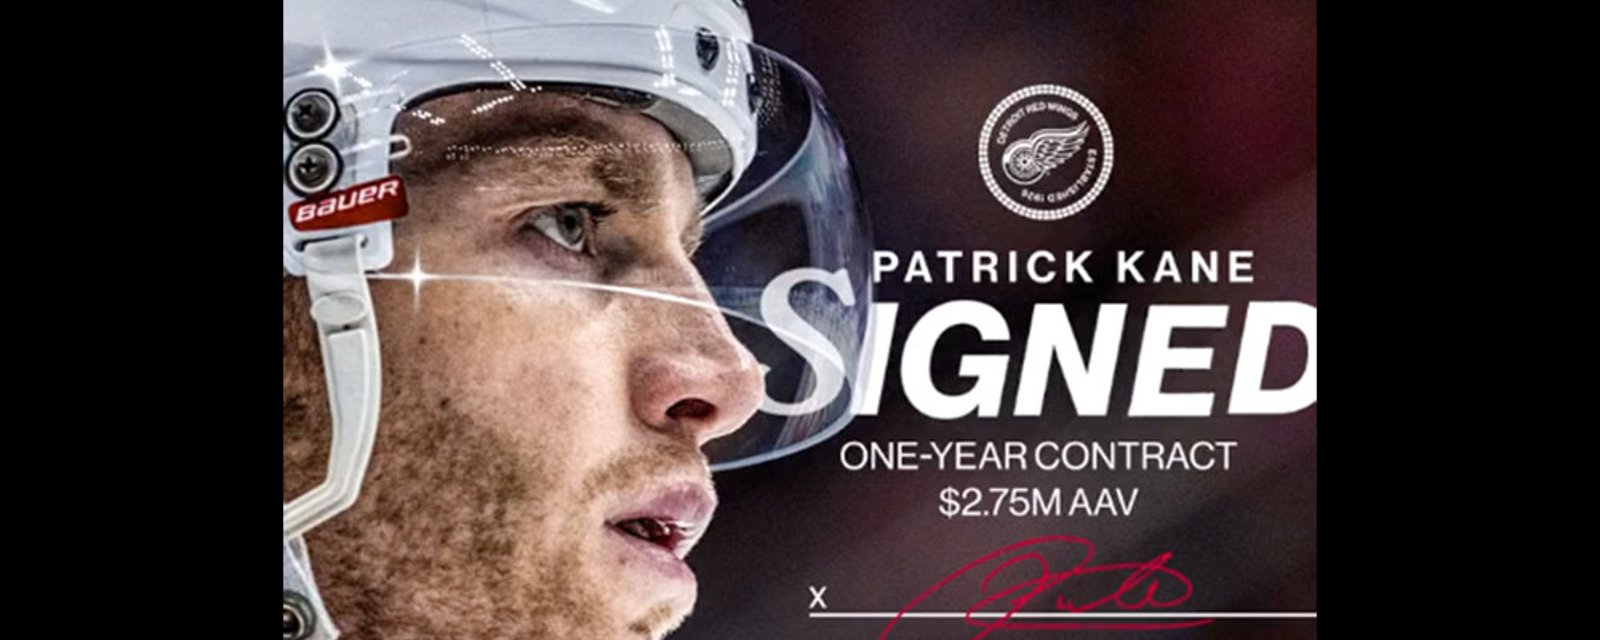 It's official, the Red Wings have signed Patrick Kane